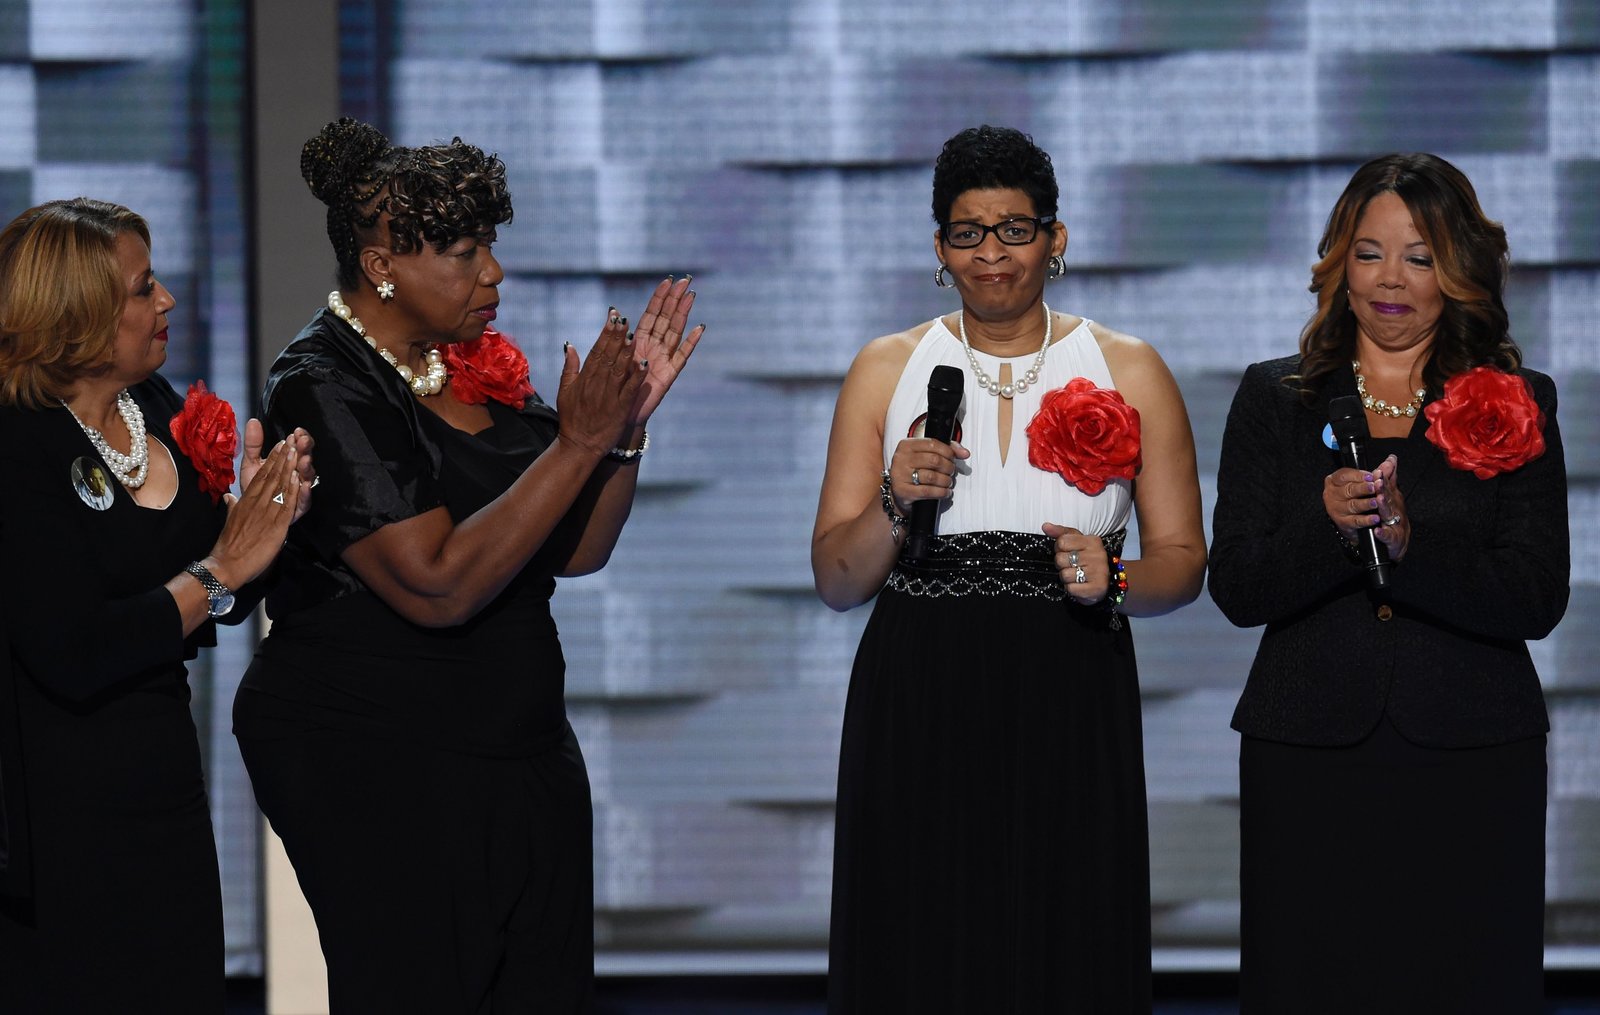 Geneva Reed-Veal (second from right) speaks about her support for Hillary Clinton and about her daughter, Sandra Bland, who was found dead in her jail cell last summer.  Saul Loeb/AFP/Getty Images  hide caption toggle caption  Saul Loeb/AFP/Getty Images 